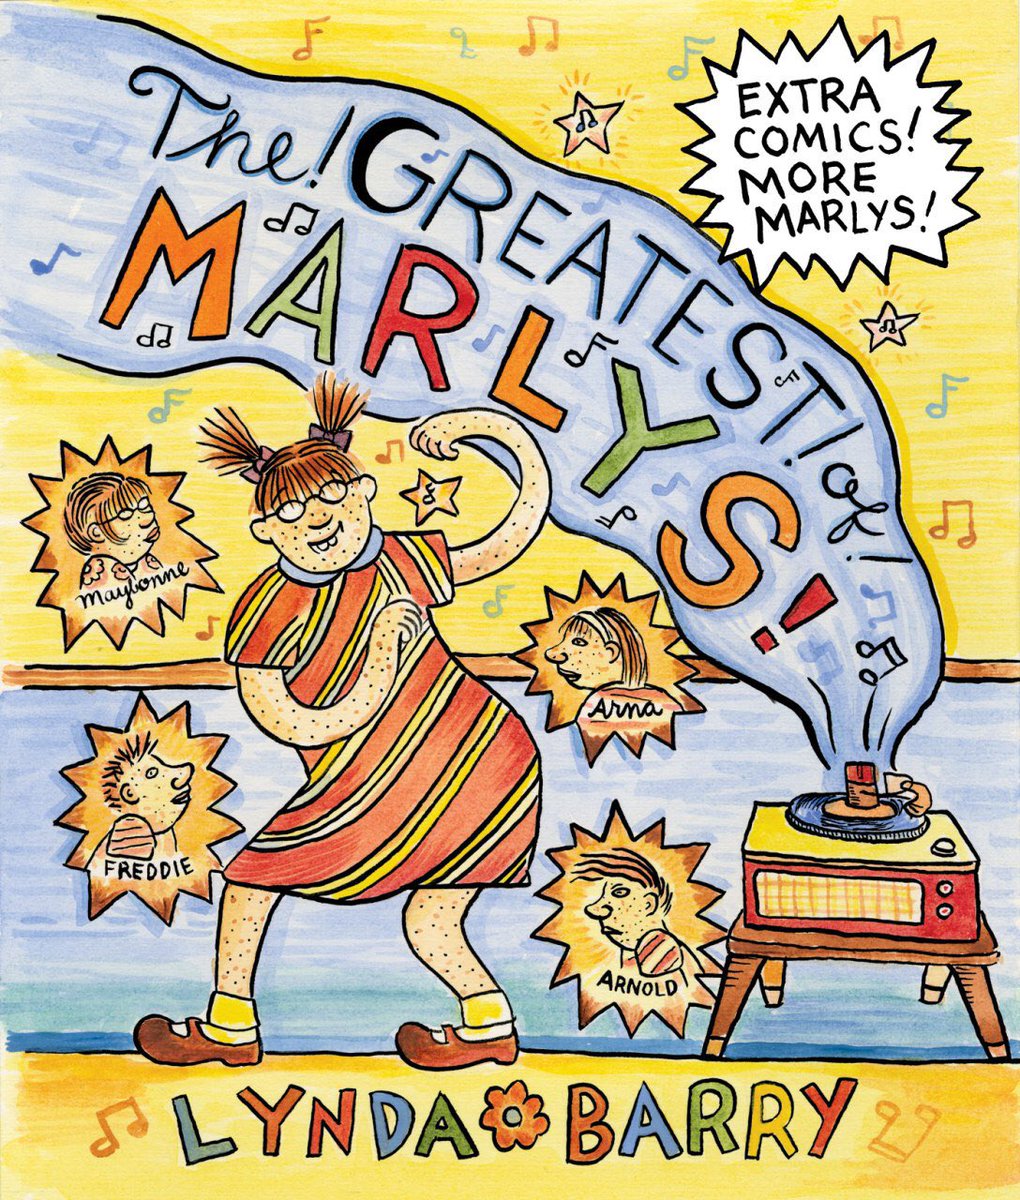 The Greatest of Marlys by Lynda Barry - Half nostalgia, half anti-nostalgia. A very bittersweet comic that I very much enjoyed.